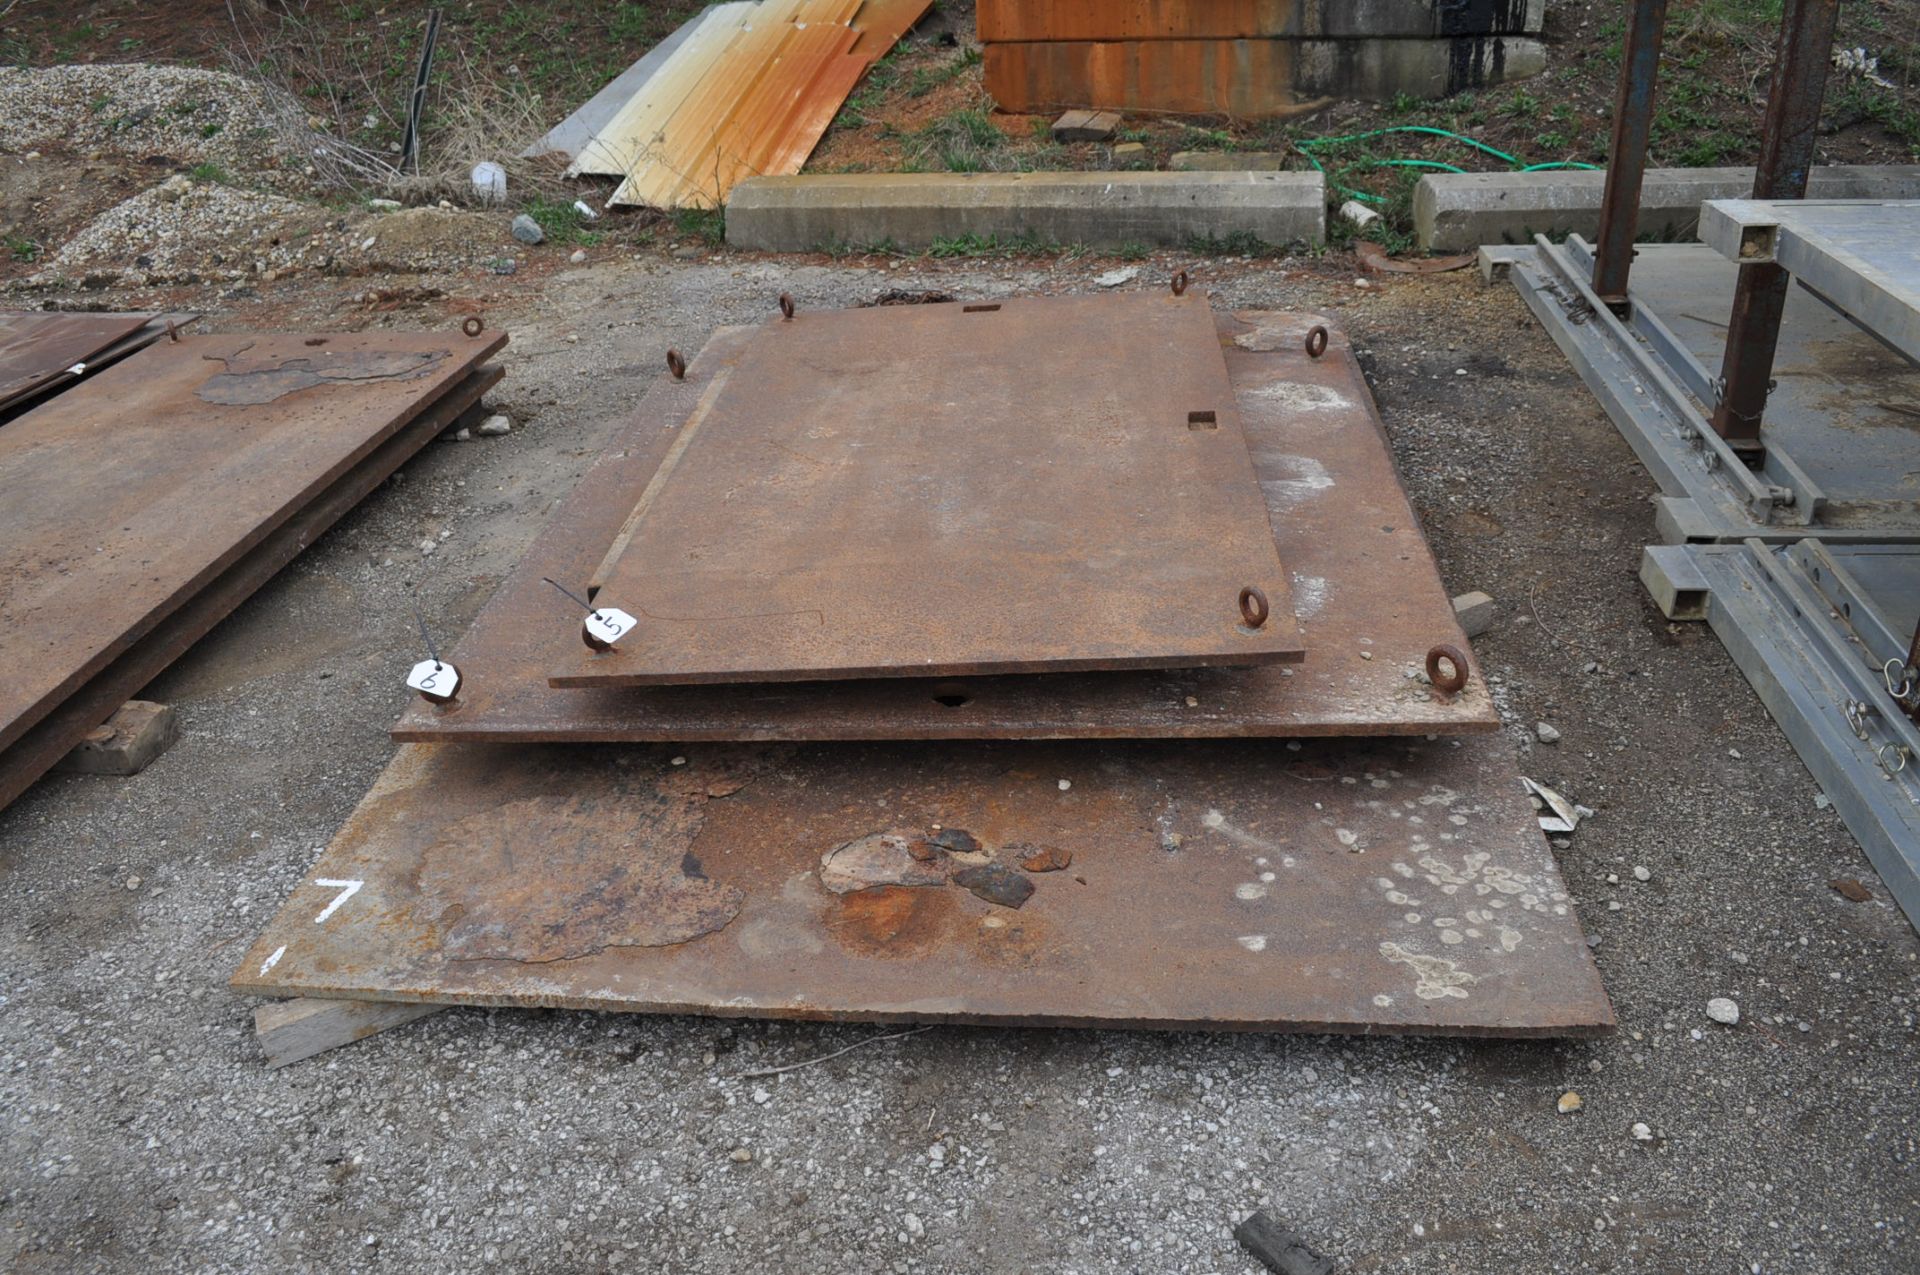 Steel plate 6' x 6' x 7/8" with 4 eyes for lifting, used as crane jack pads